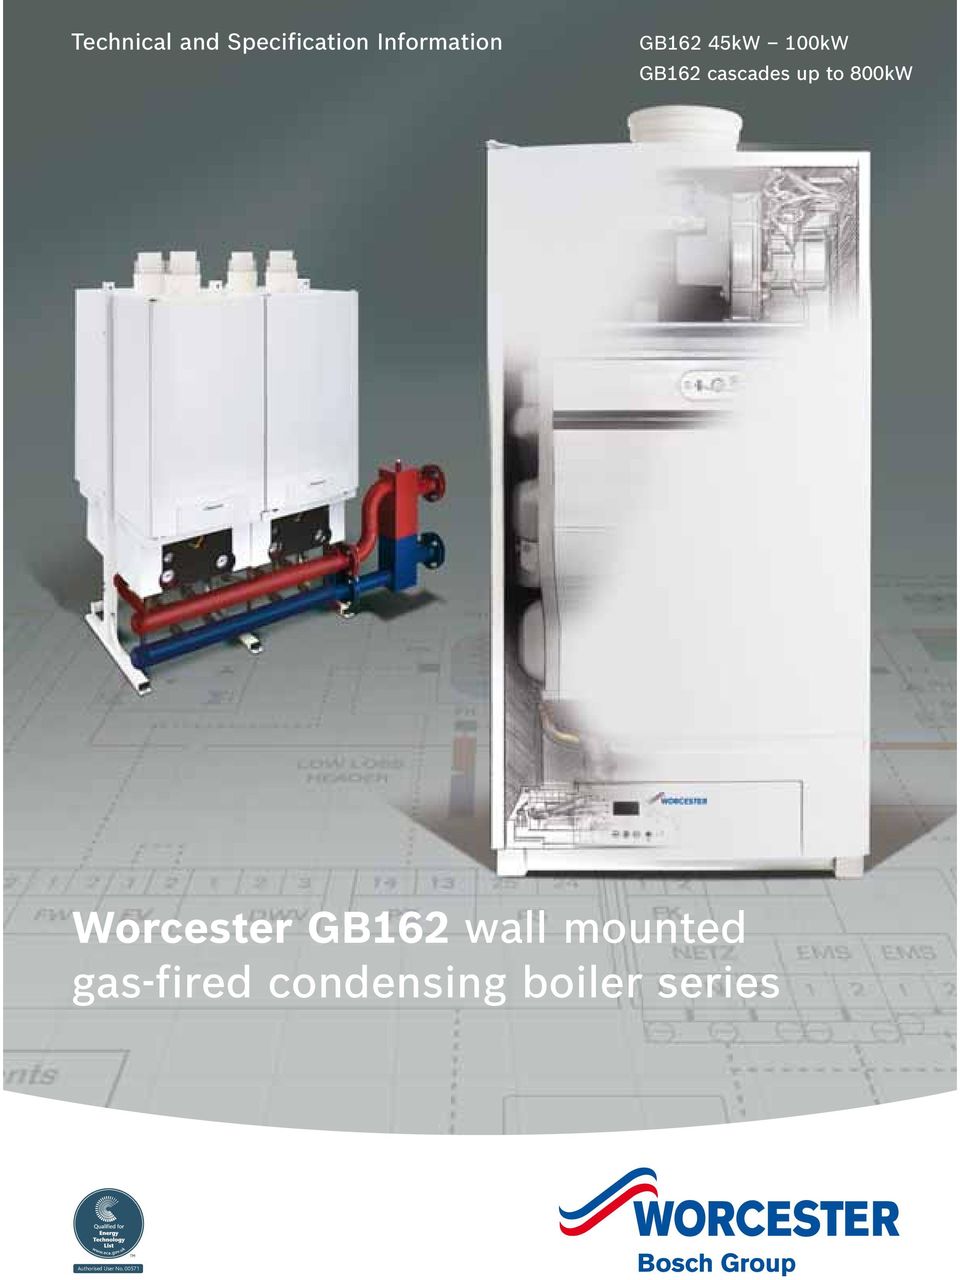 Worcester wall mounted gas-fired